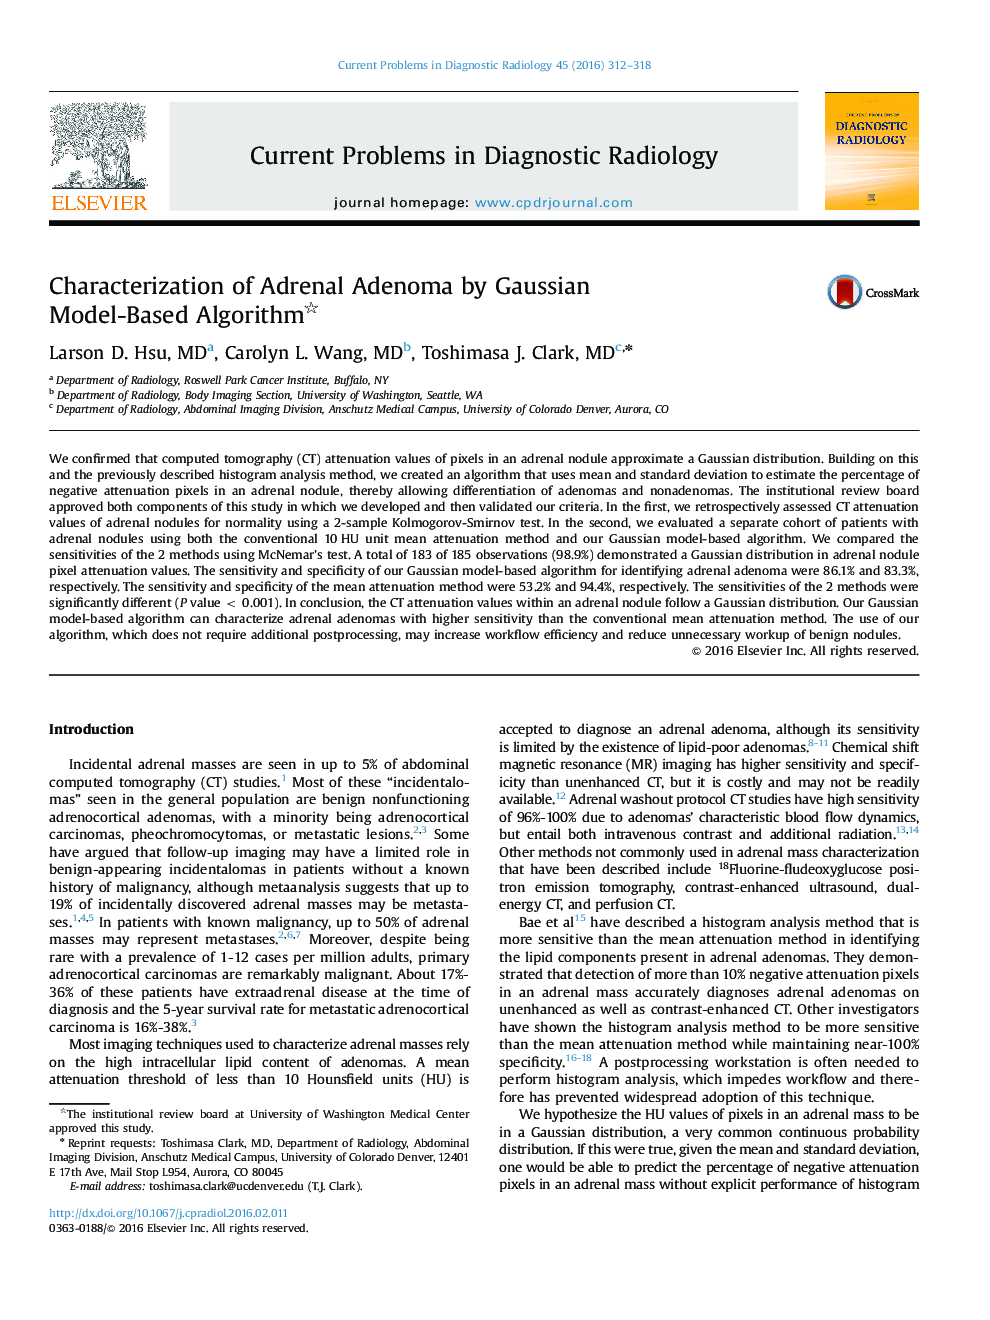 Characterization of Adrenal Adenoma by Gaussian Model-Based Algorithm 